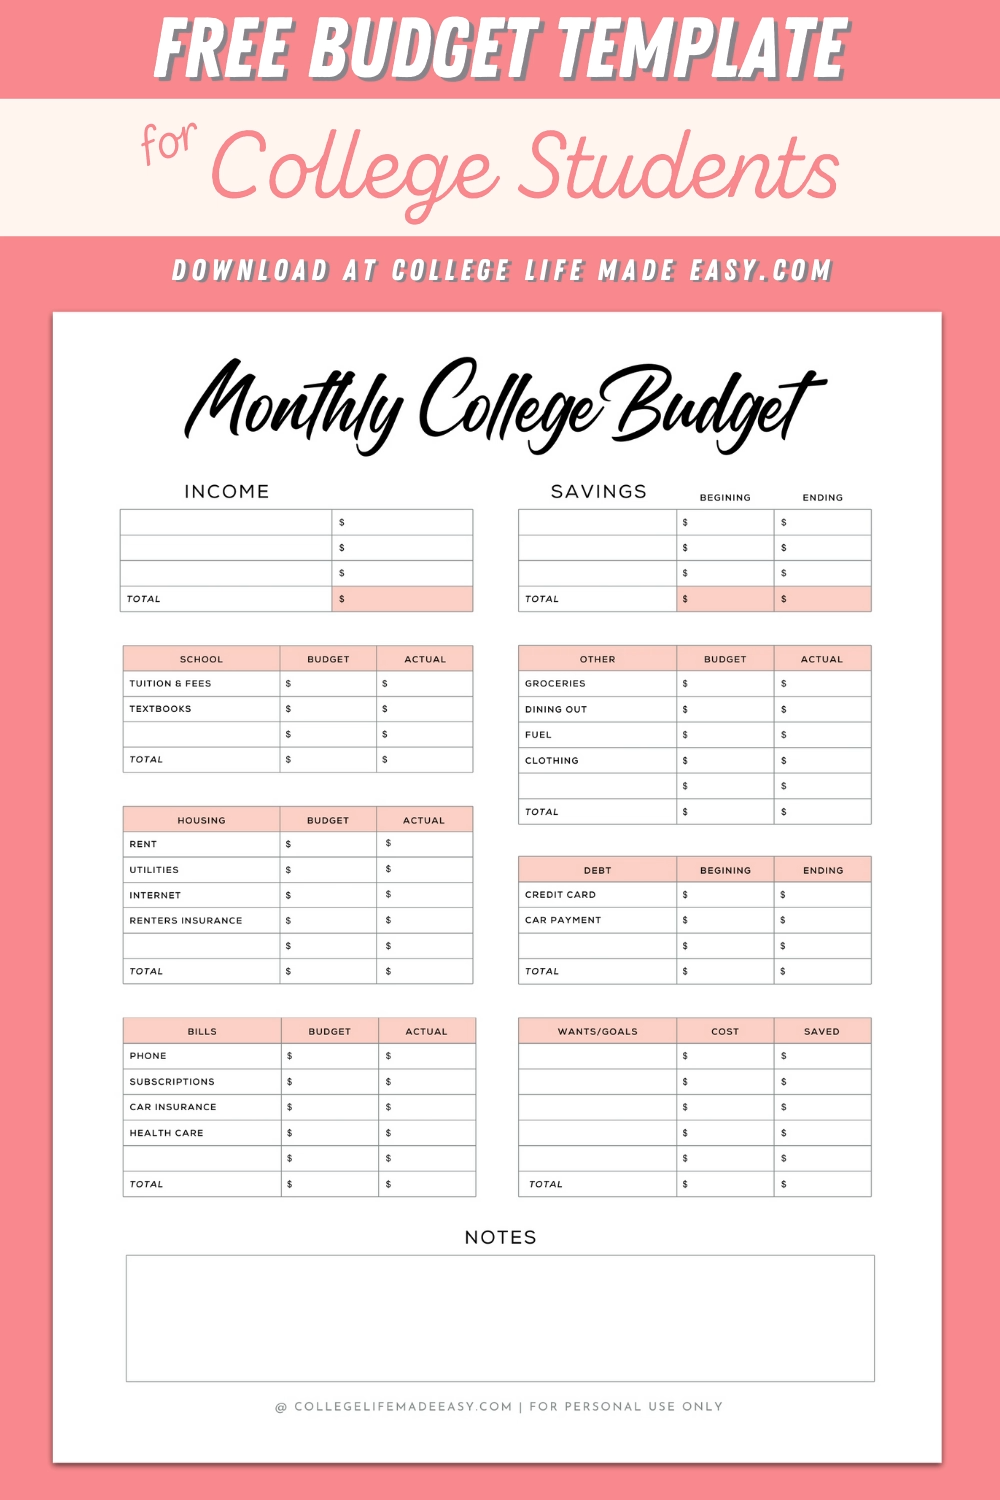 College Student Budget Template -   19 the budget mom ideas